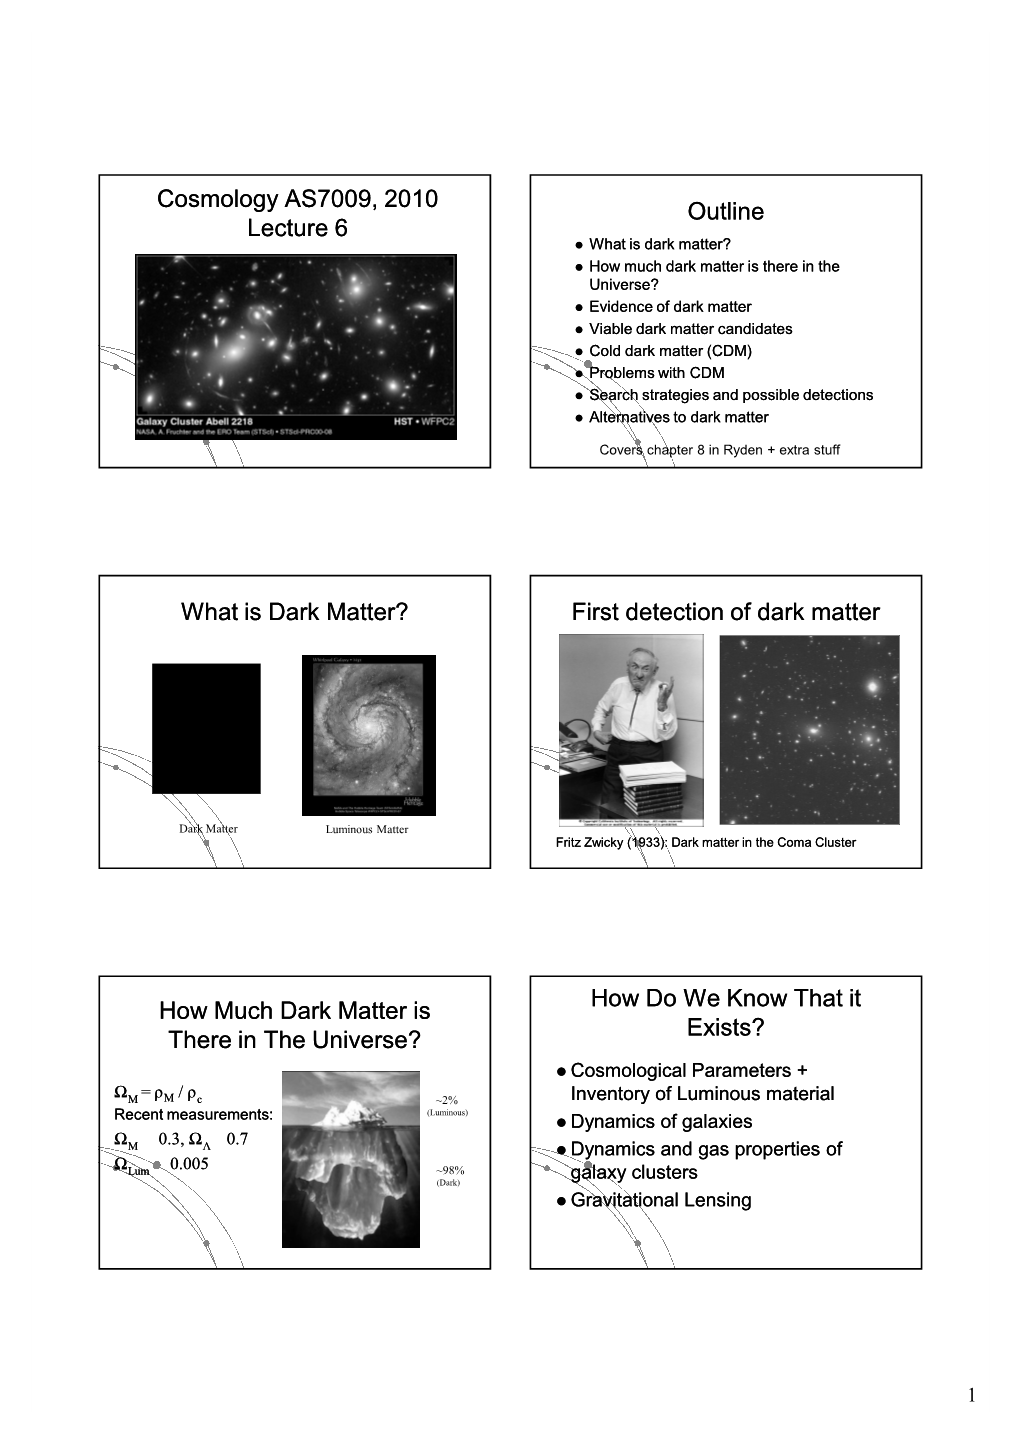 Cosmology AS7009, Cosmology AS7009, 2010 Lecture 6 Outline What Is Dark Matter? First Detection of Dark Matter How Much Dark